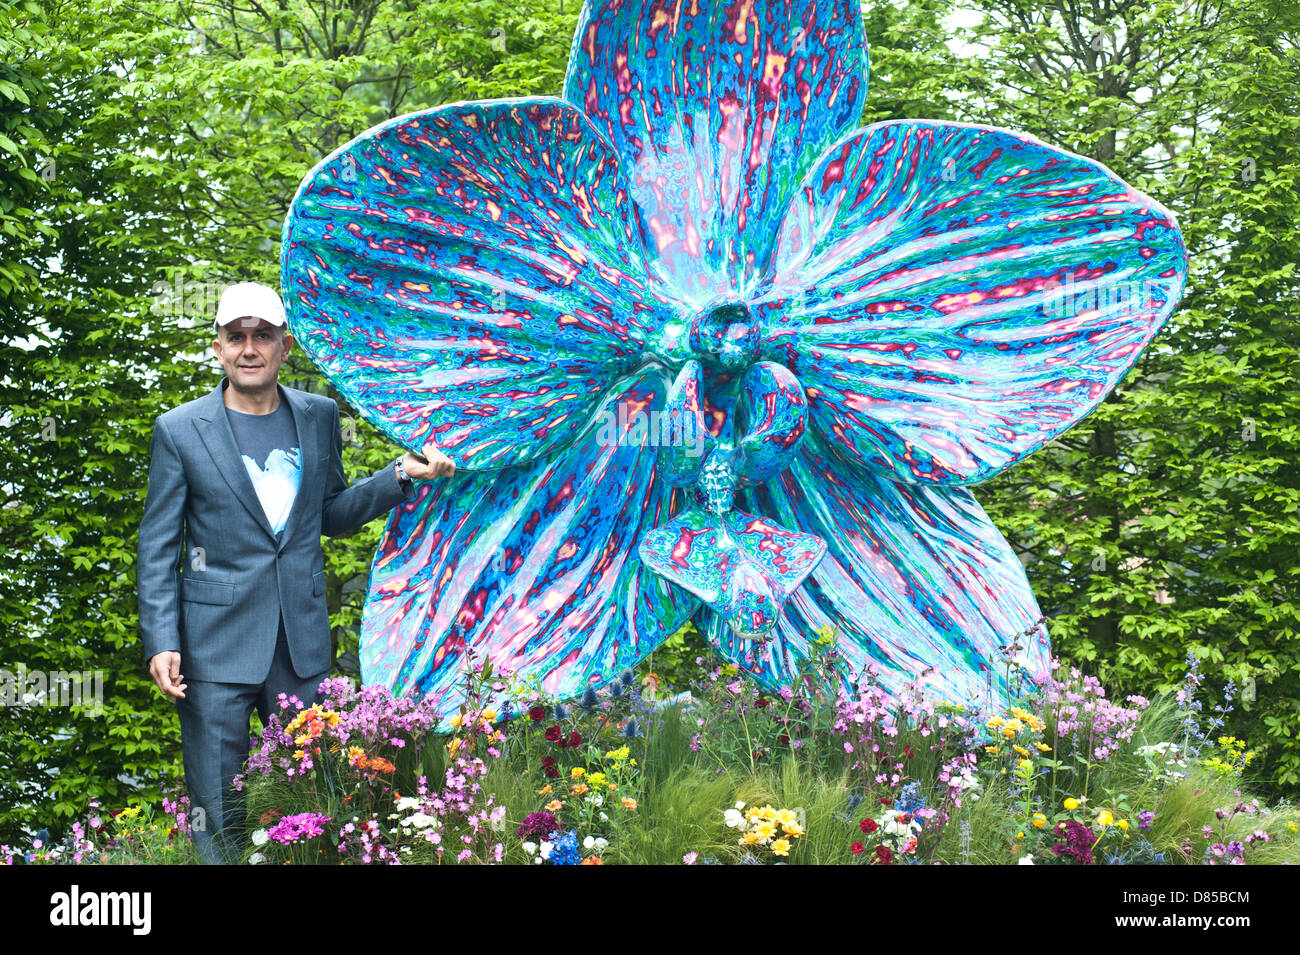 London, UK - 20 May 2013: Artist Marc Quinn  unveils his new sculpture that will be auctioned by Sotheby's as part of the RHS Centenary appeal to raise £1M to support the next generation of horticulturistsduring the RHS Chelsea Flower Show 2013 edition press day. Credit: Piero Cruciatti/Alamy Live News Stock Photo